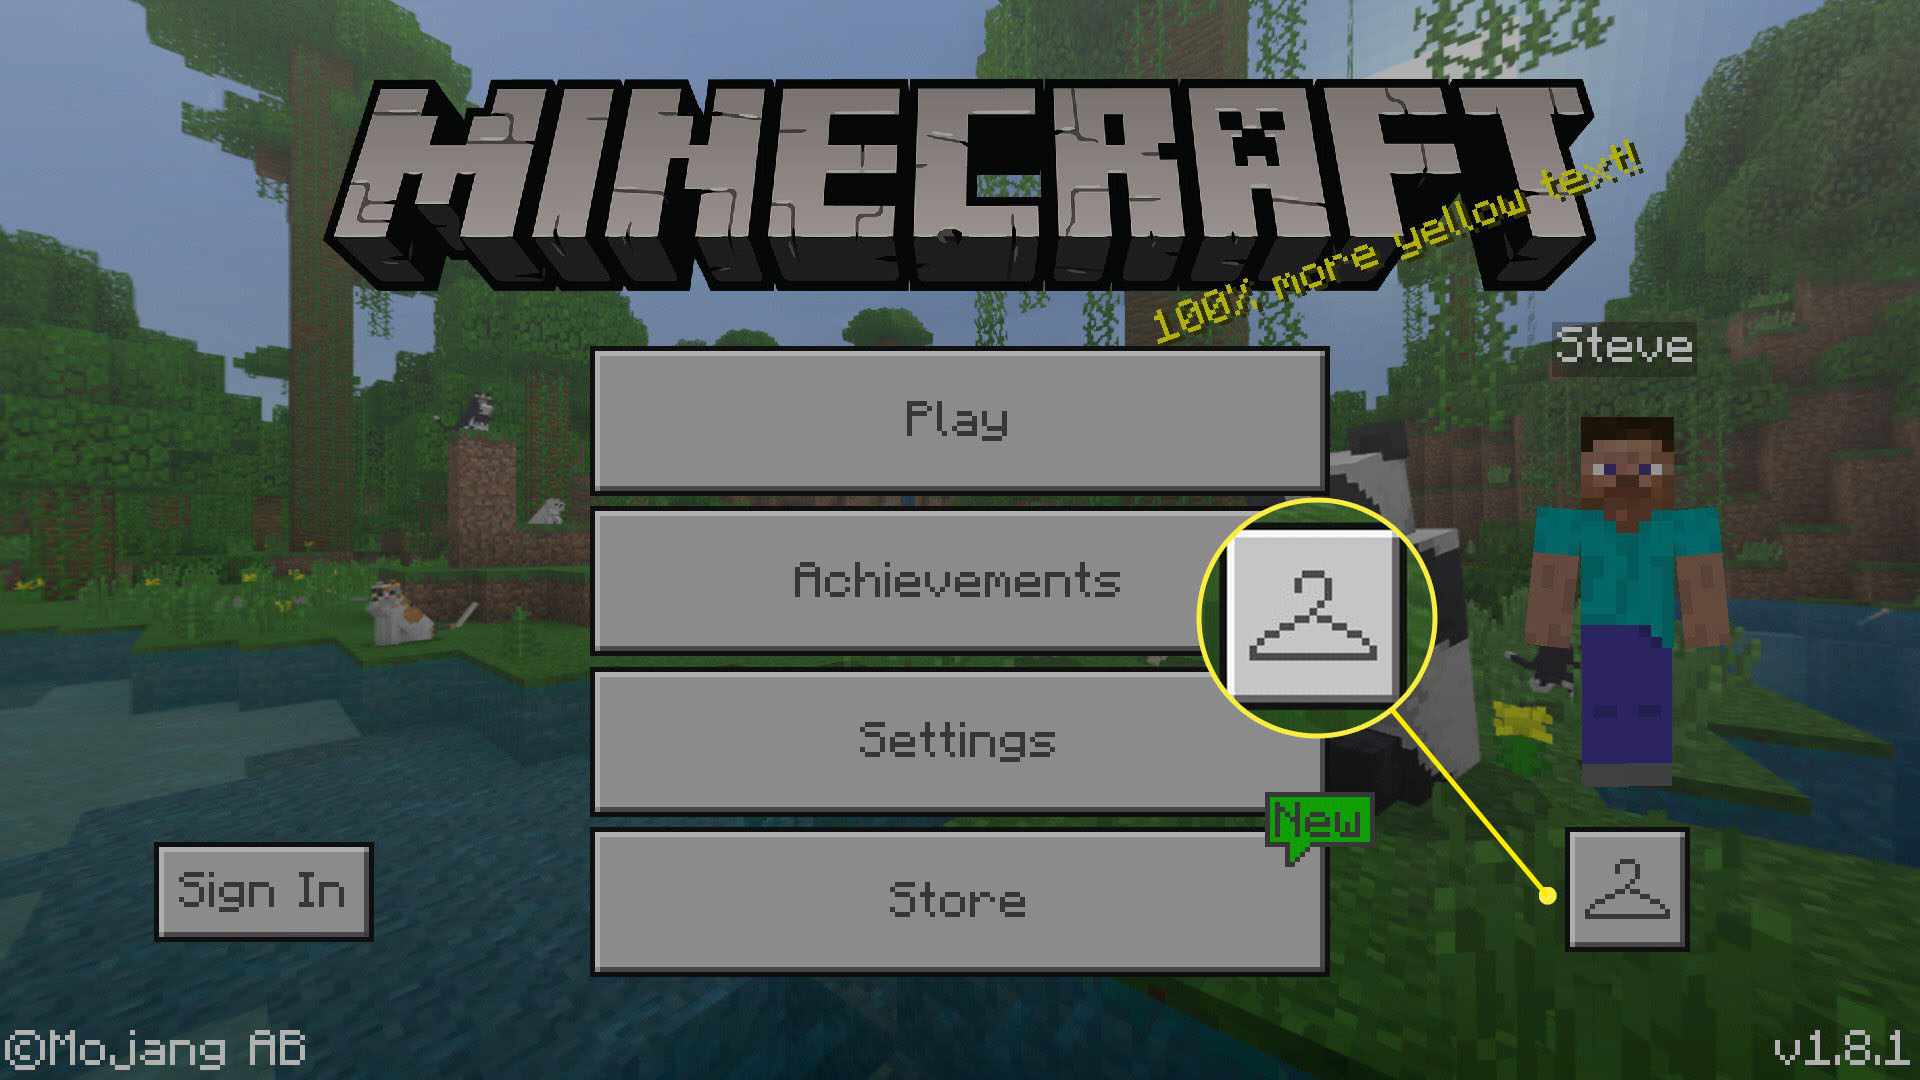 do you have to buy minecraft for pc if you own it on mac